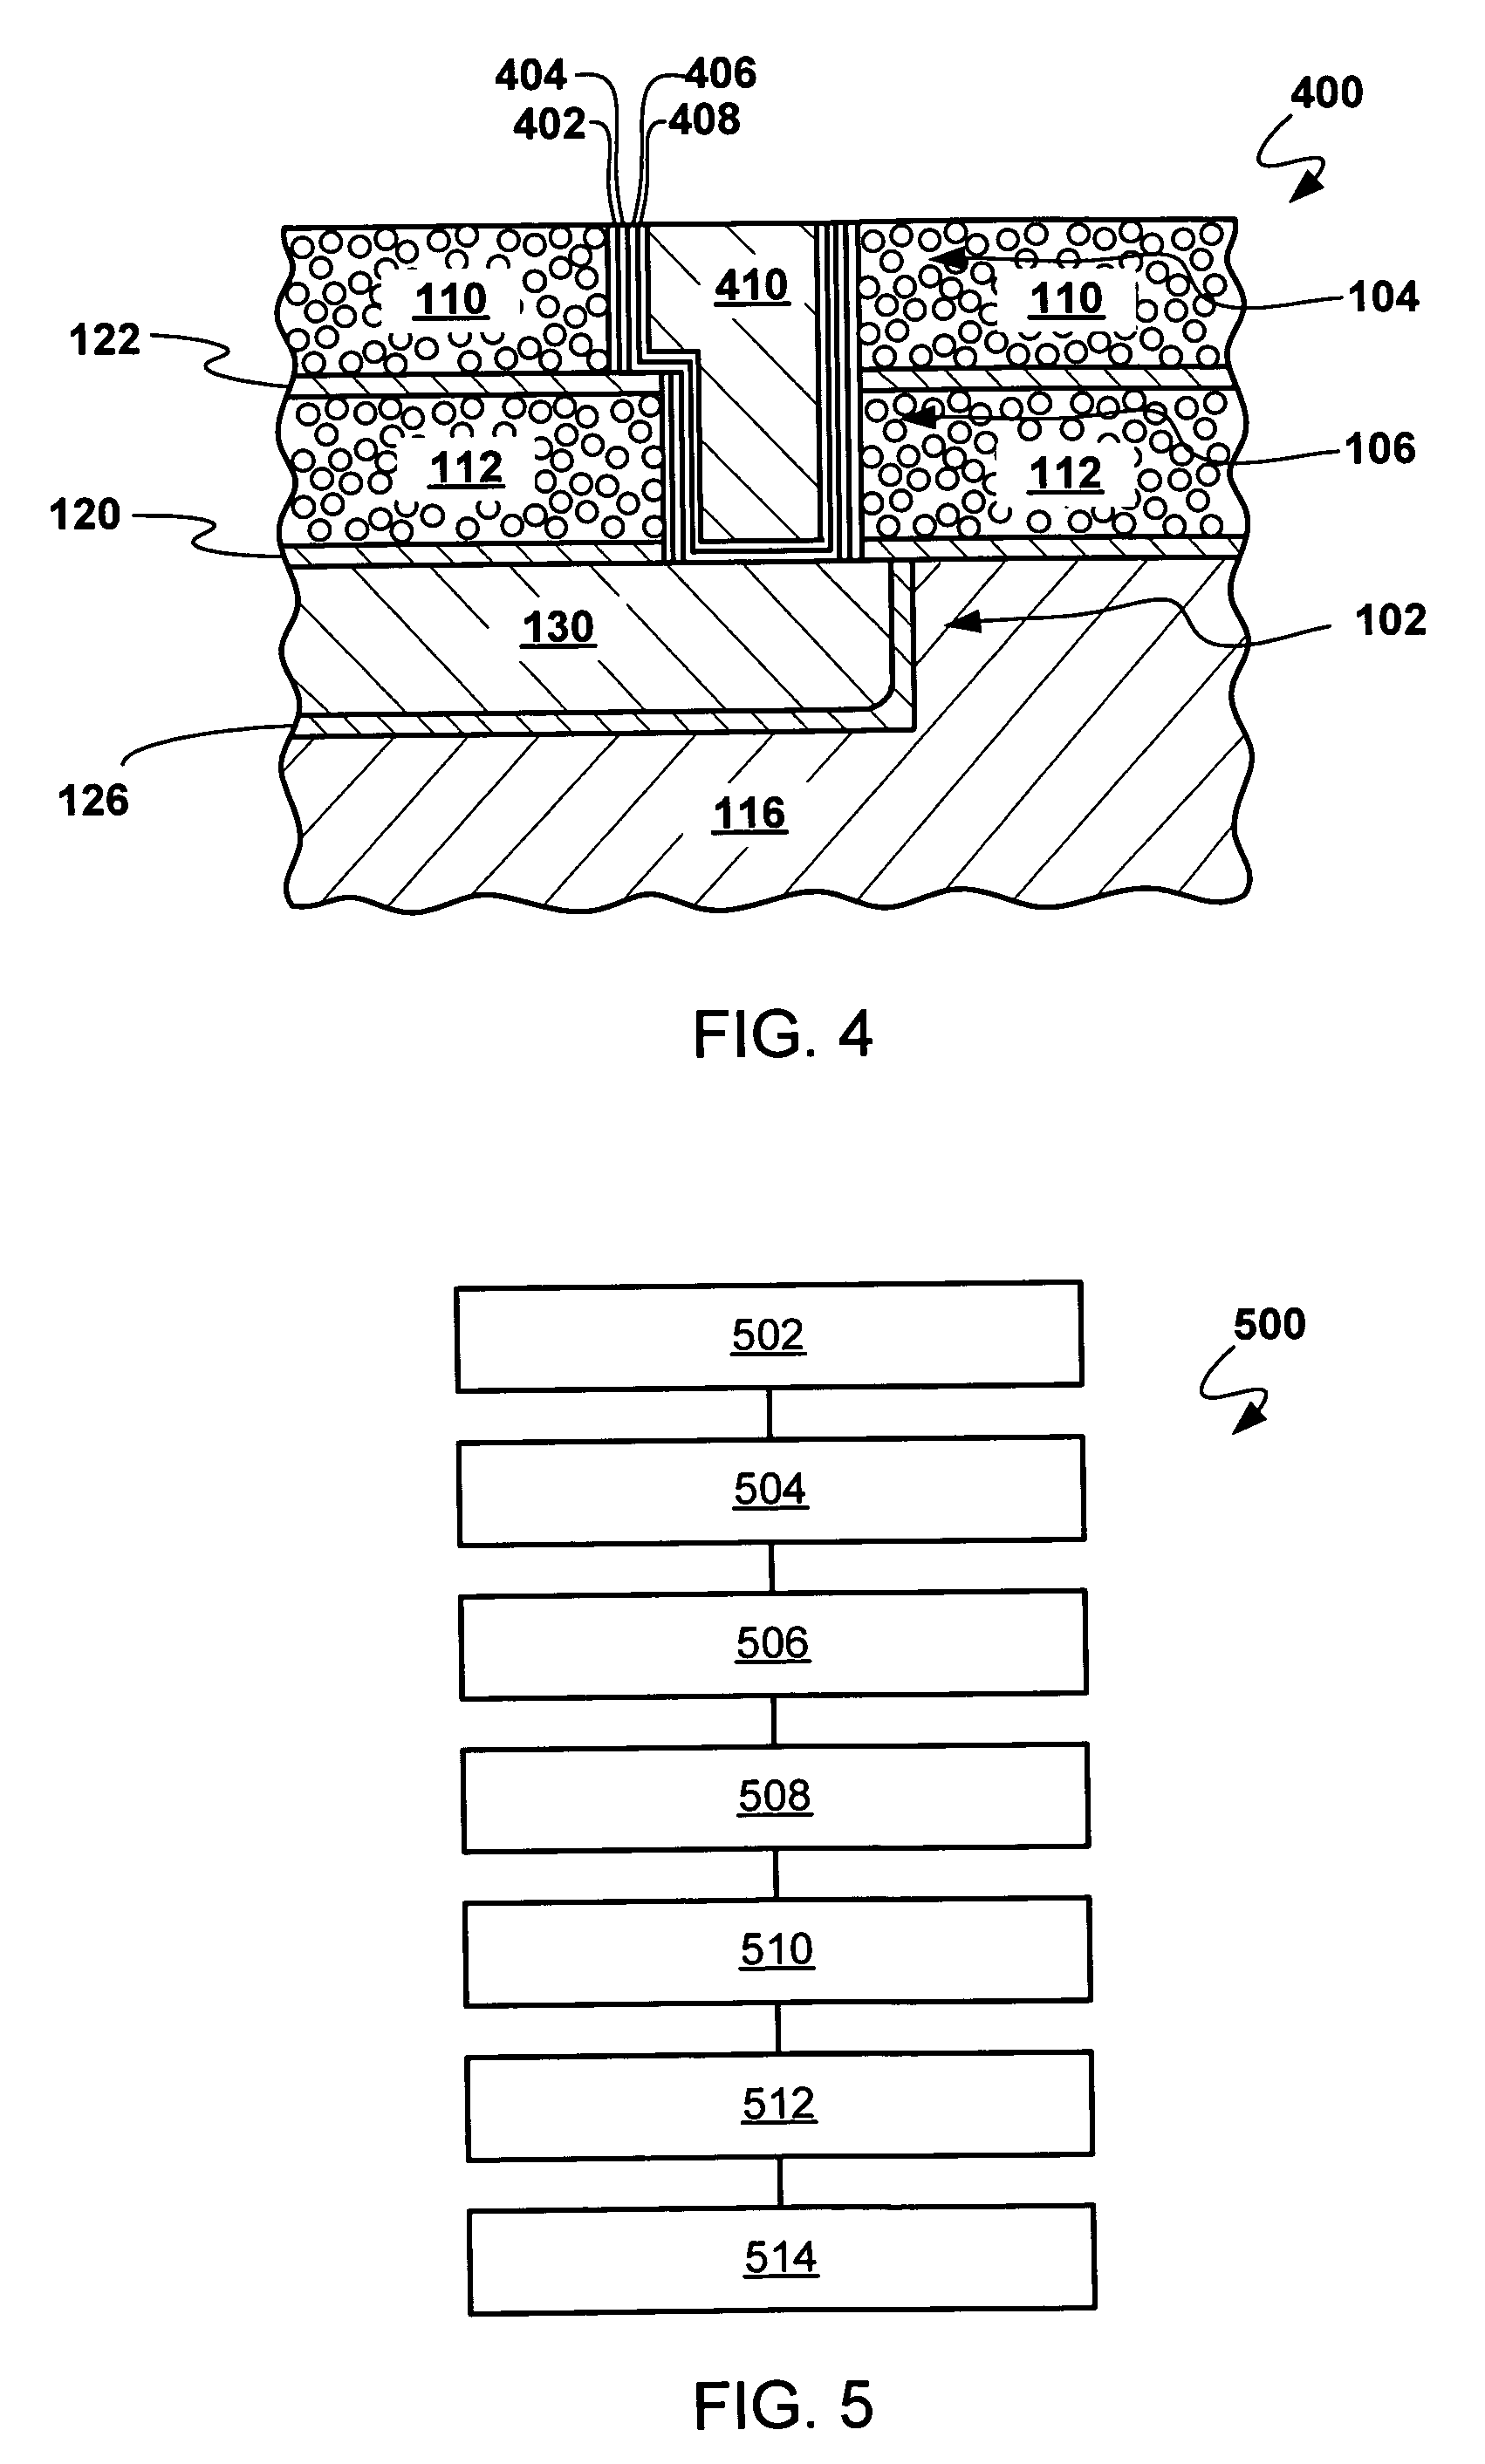 Nano-electrode-array for integrated circuit interconnects